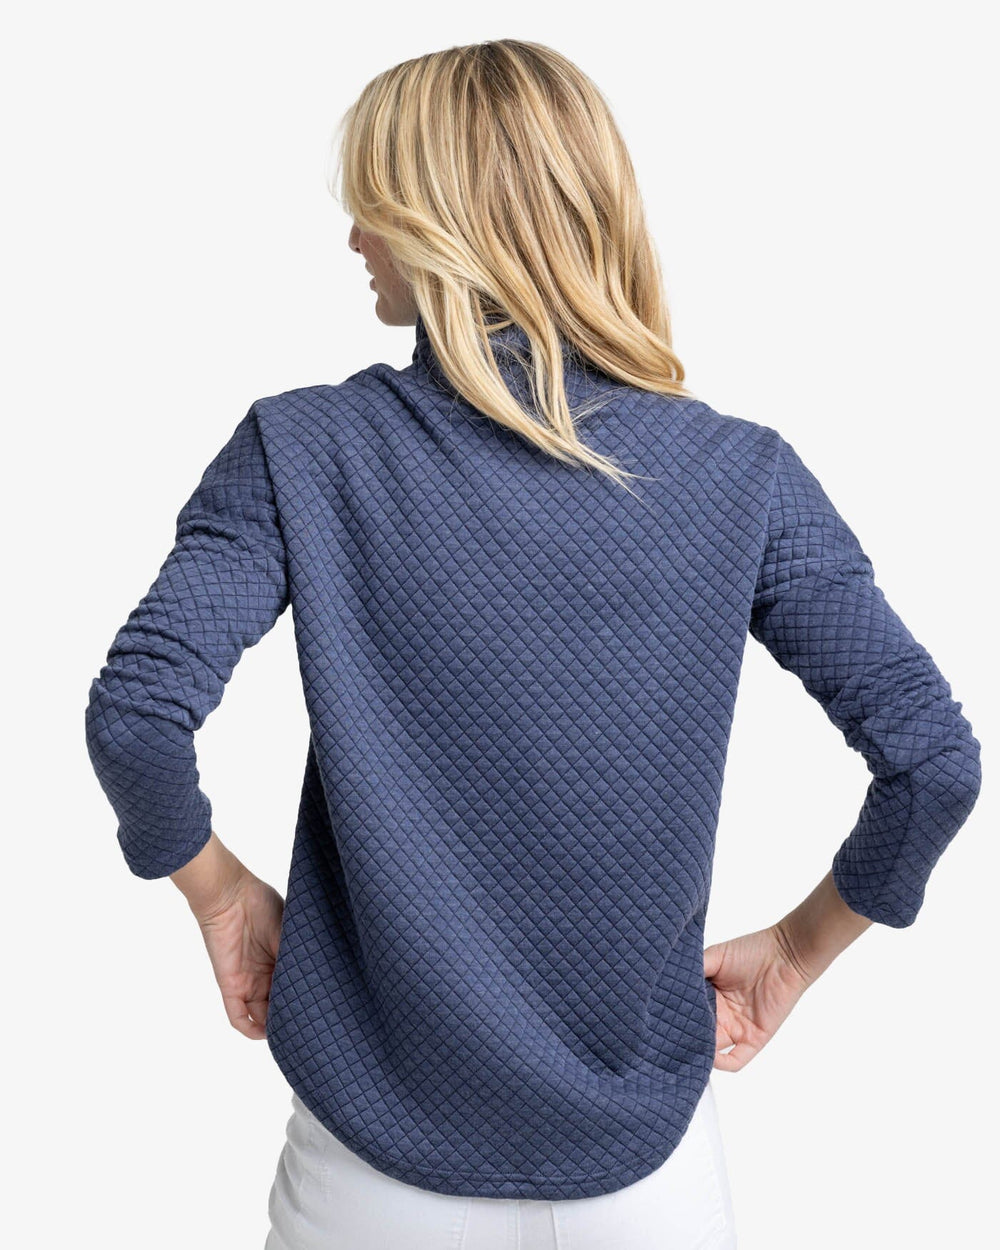 The back view of the Southern Tide Mellie MockNeck Sweatshirt by Southern Tide - Nautical Navy